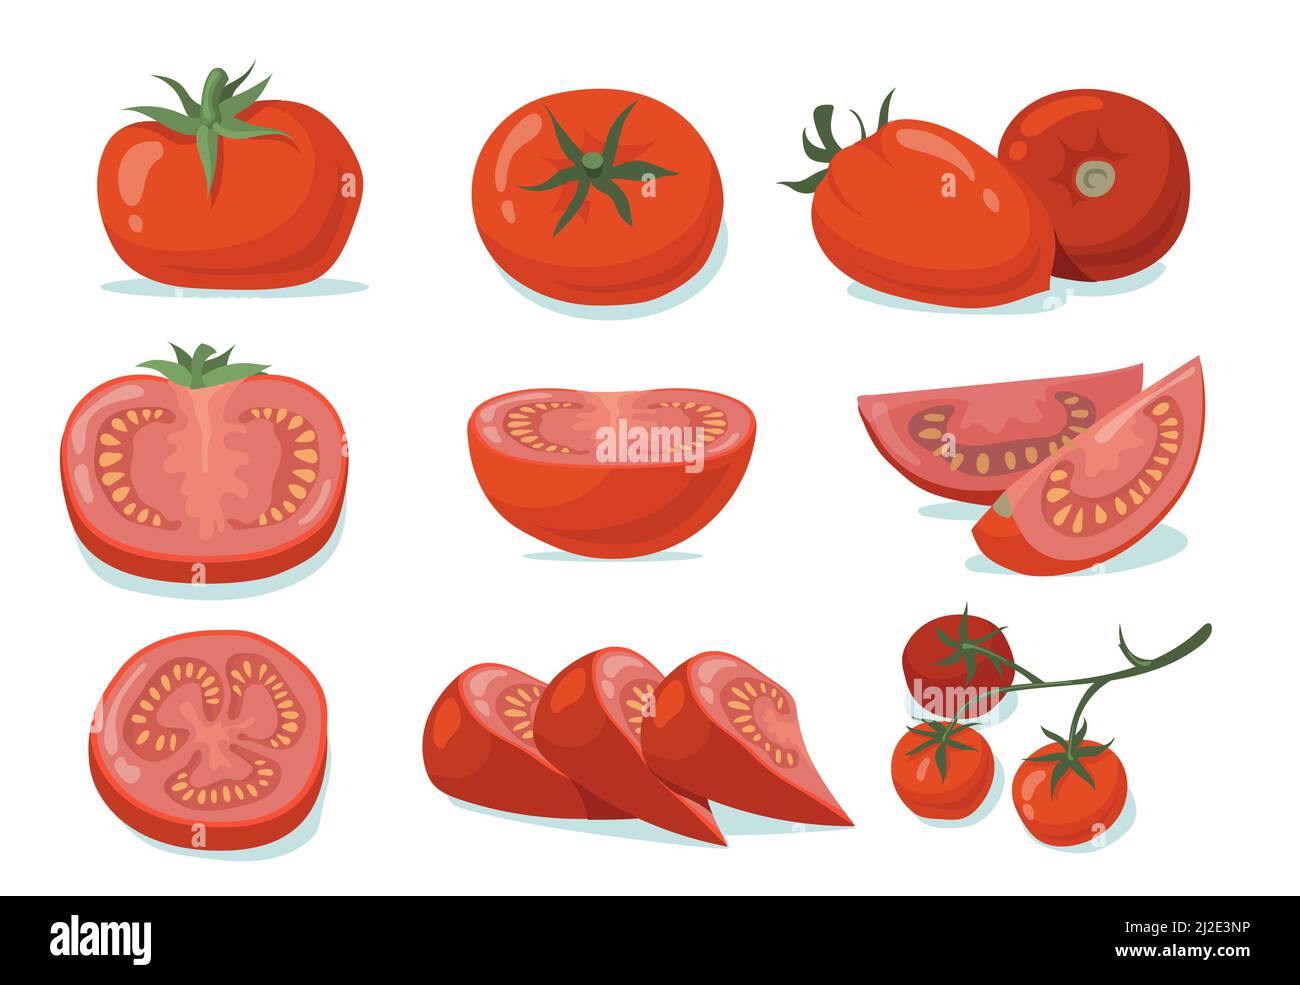 Fresh tomatoes set. Red whole and cut vegetables, halves and slices isolated on white. Vector illustration for organic food, vegetarian diet, cooking Stock Vector